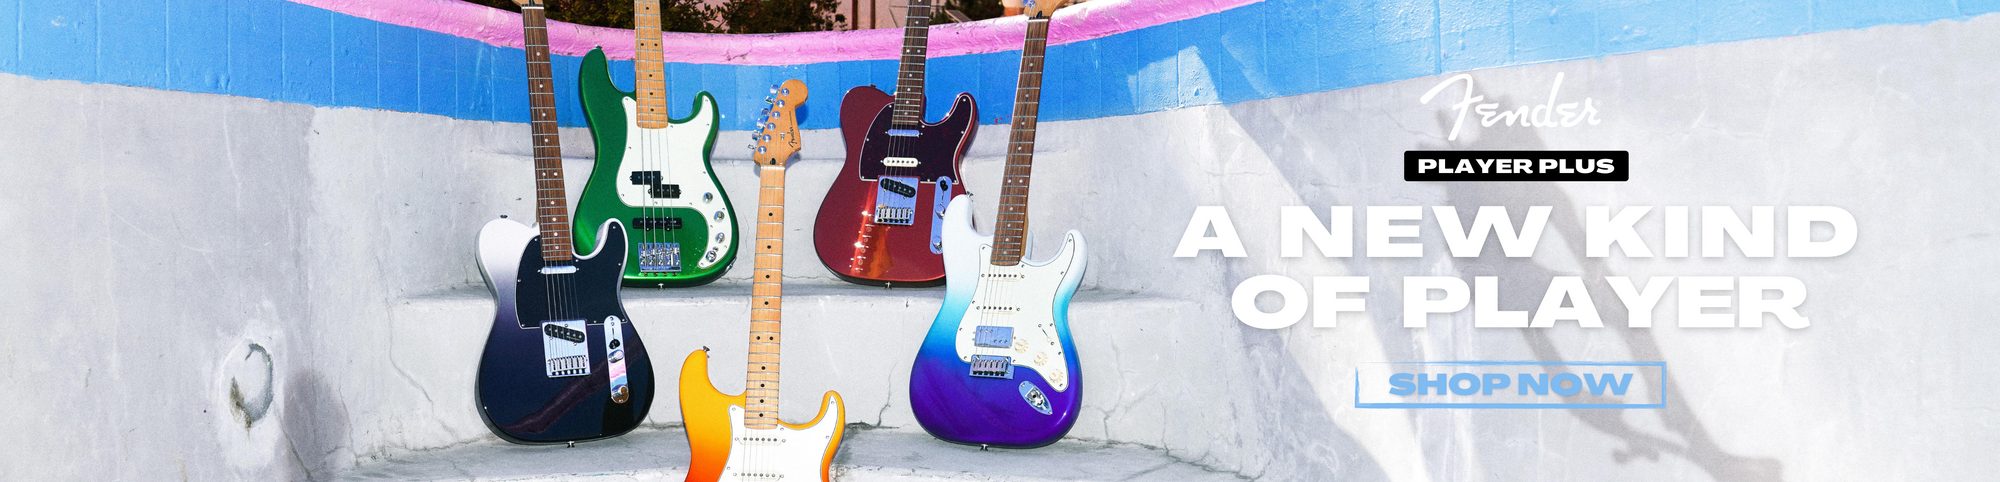 Fender launches the all new Player Plus series!-Sky Music